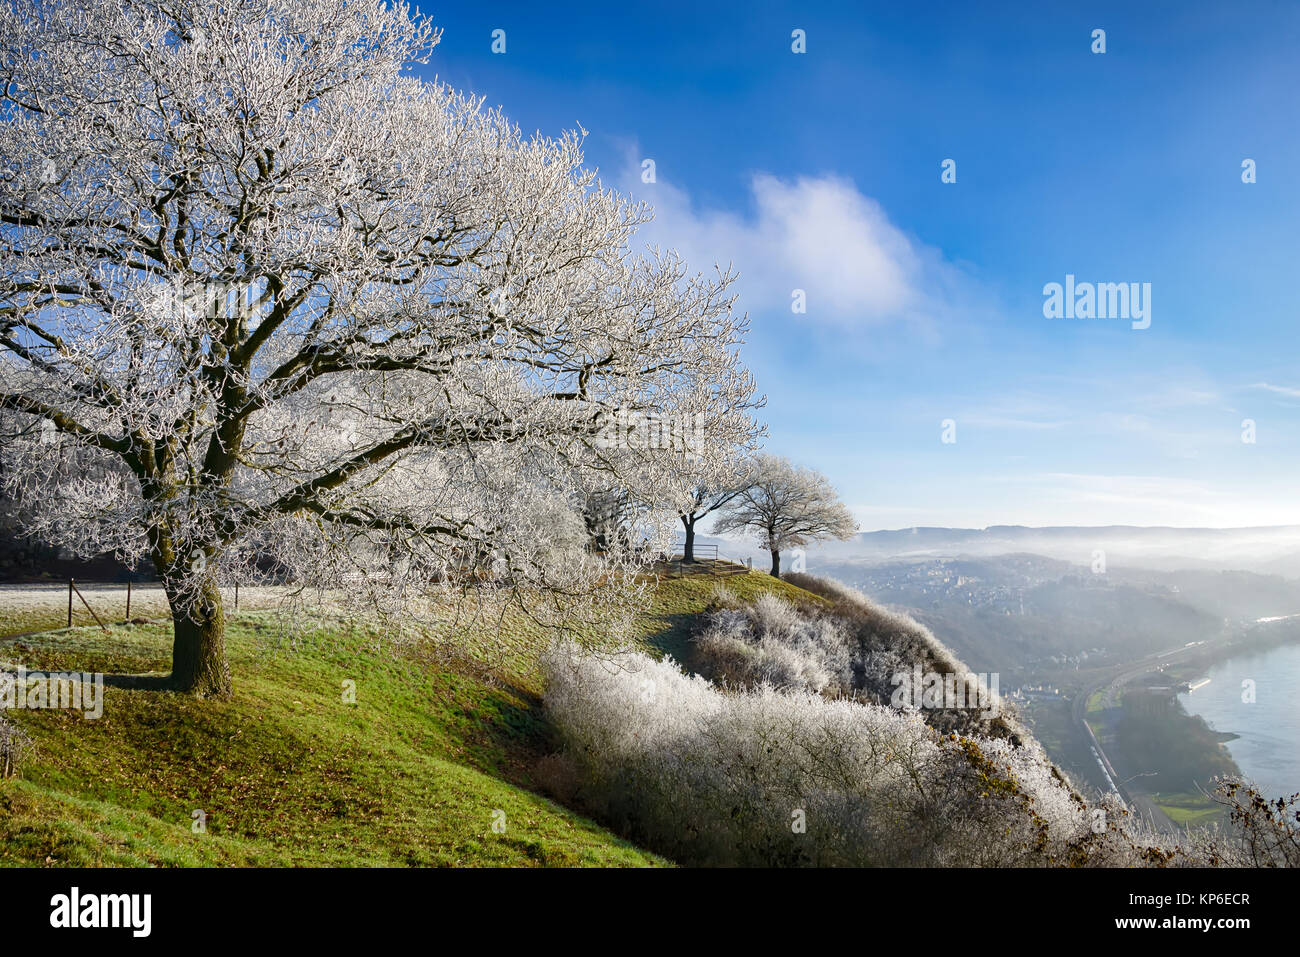 White broadleaf tree powdered with hoar frost on a cold winter morning, from viewpoint Erpeler Ley, Westerwald, Middle Rhine Valley, Germany, Europe. Stock Photo